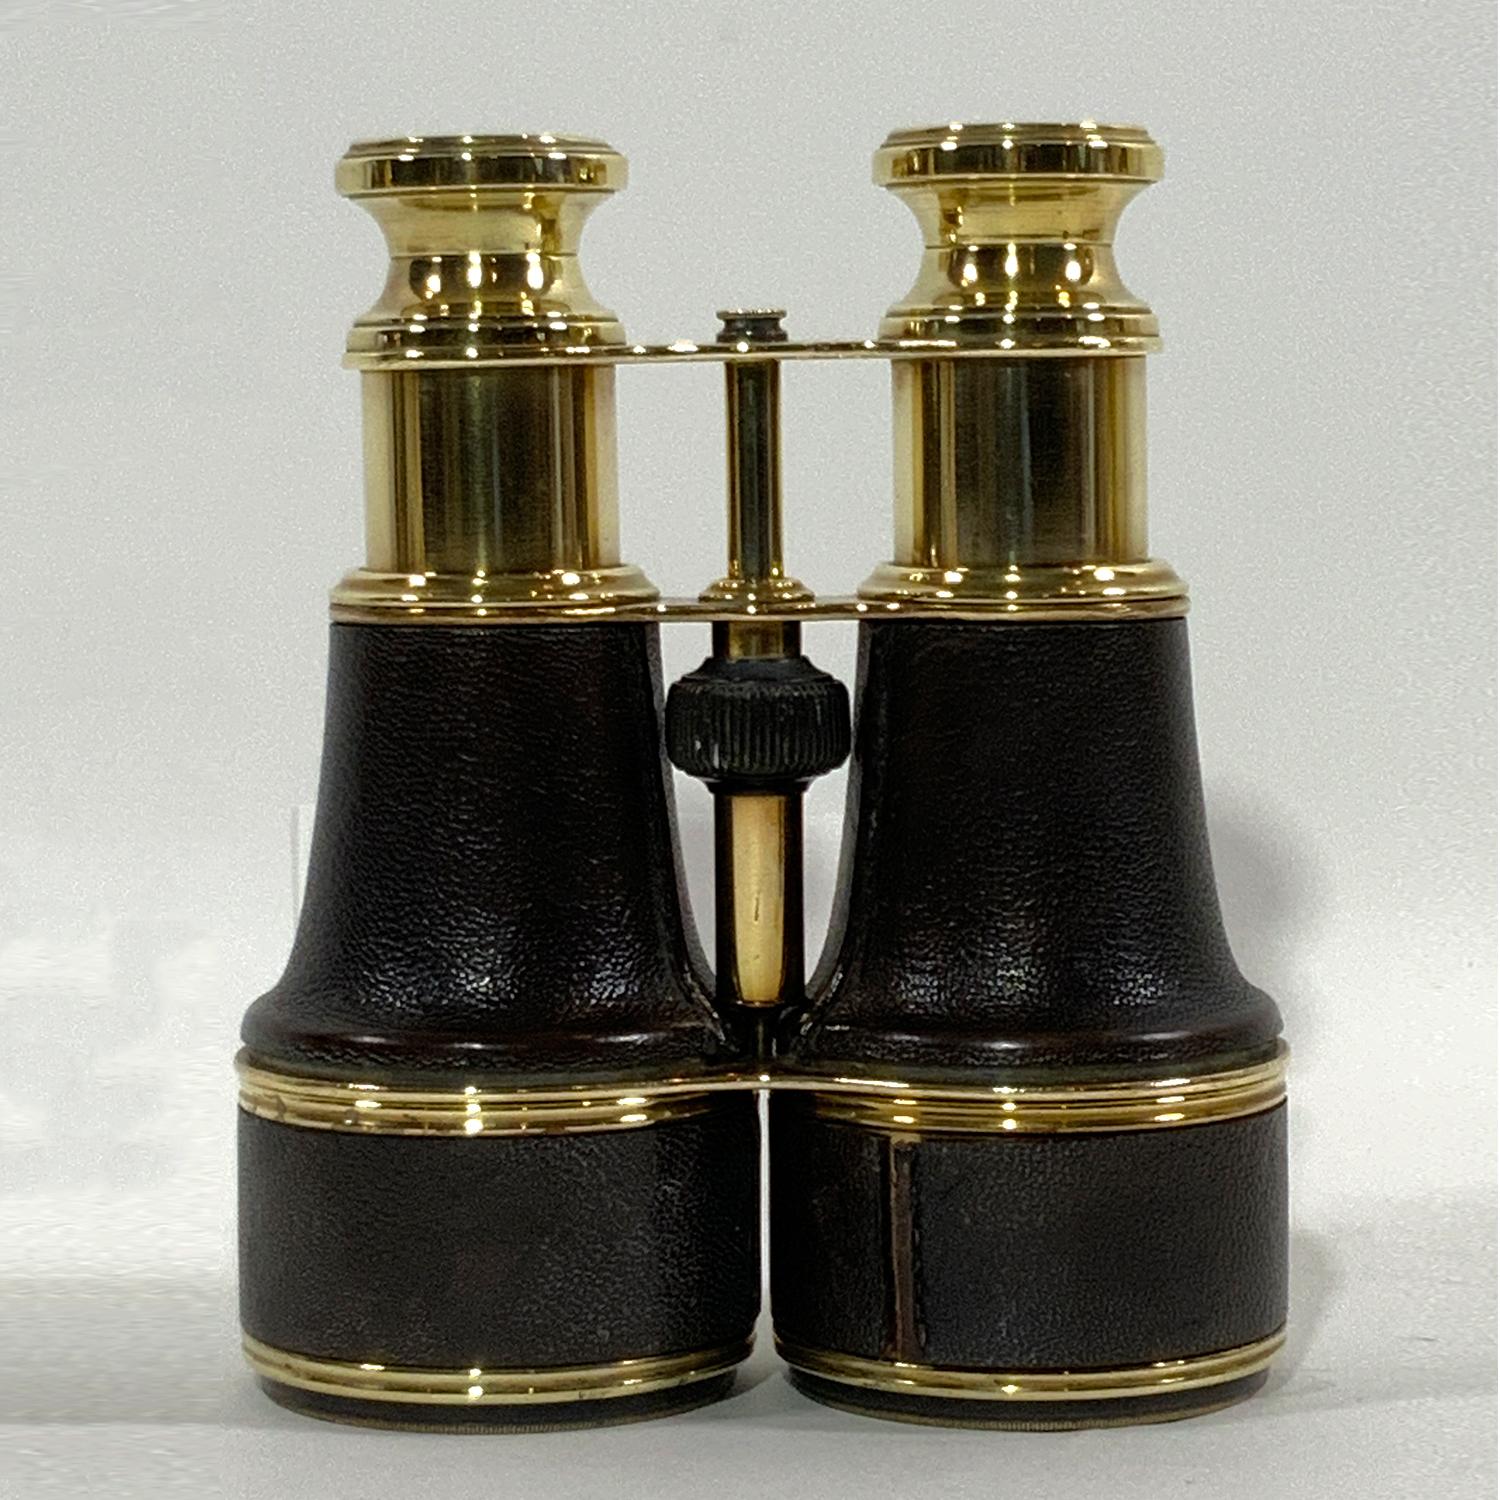 Early twentieth century yachting binoculars with fine brown leather covers on the barrels and sunshades. Knurled focal knob operates well. Clear view. Circa 1925.